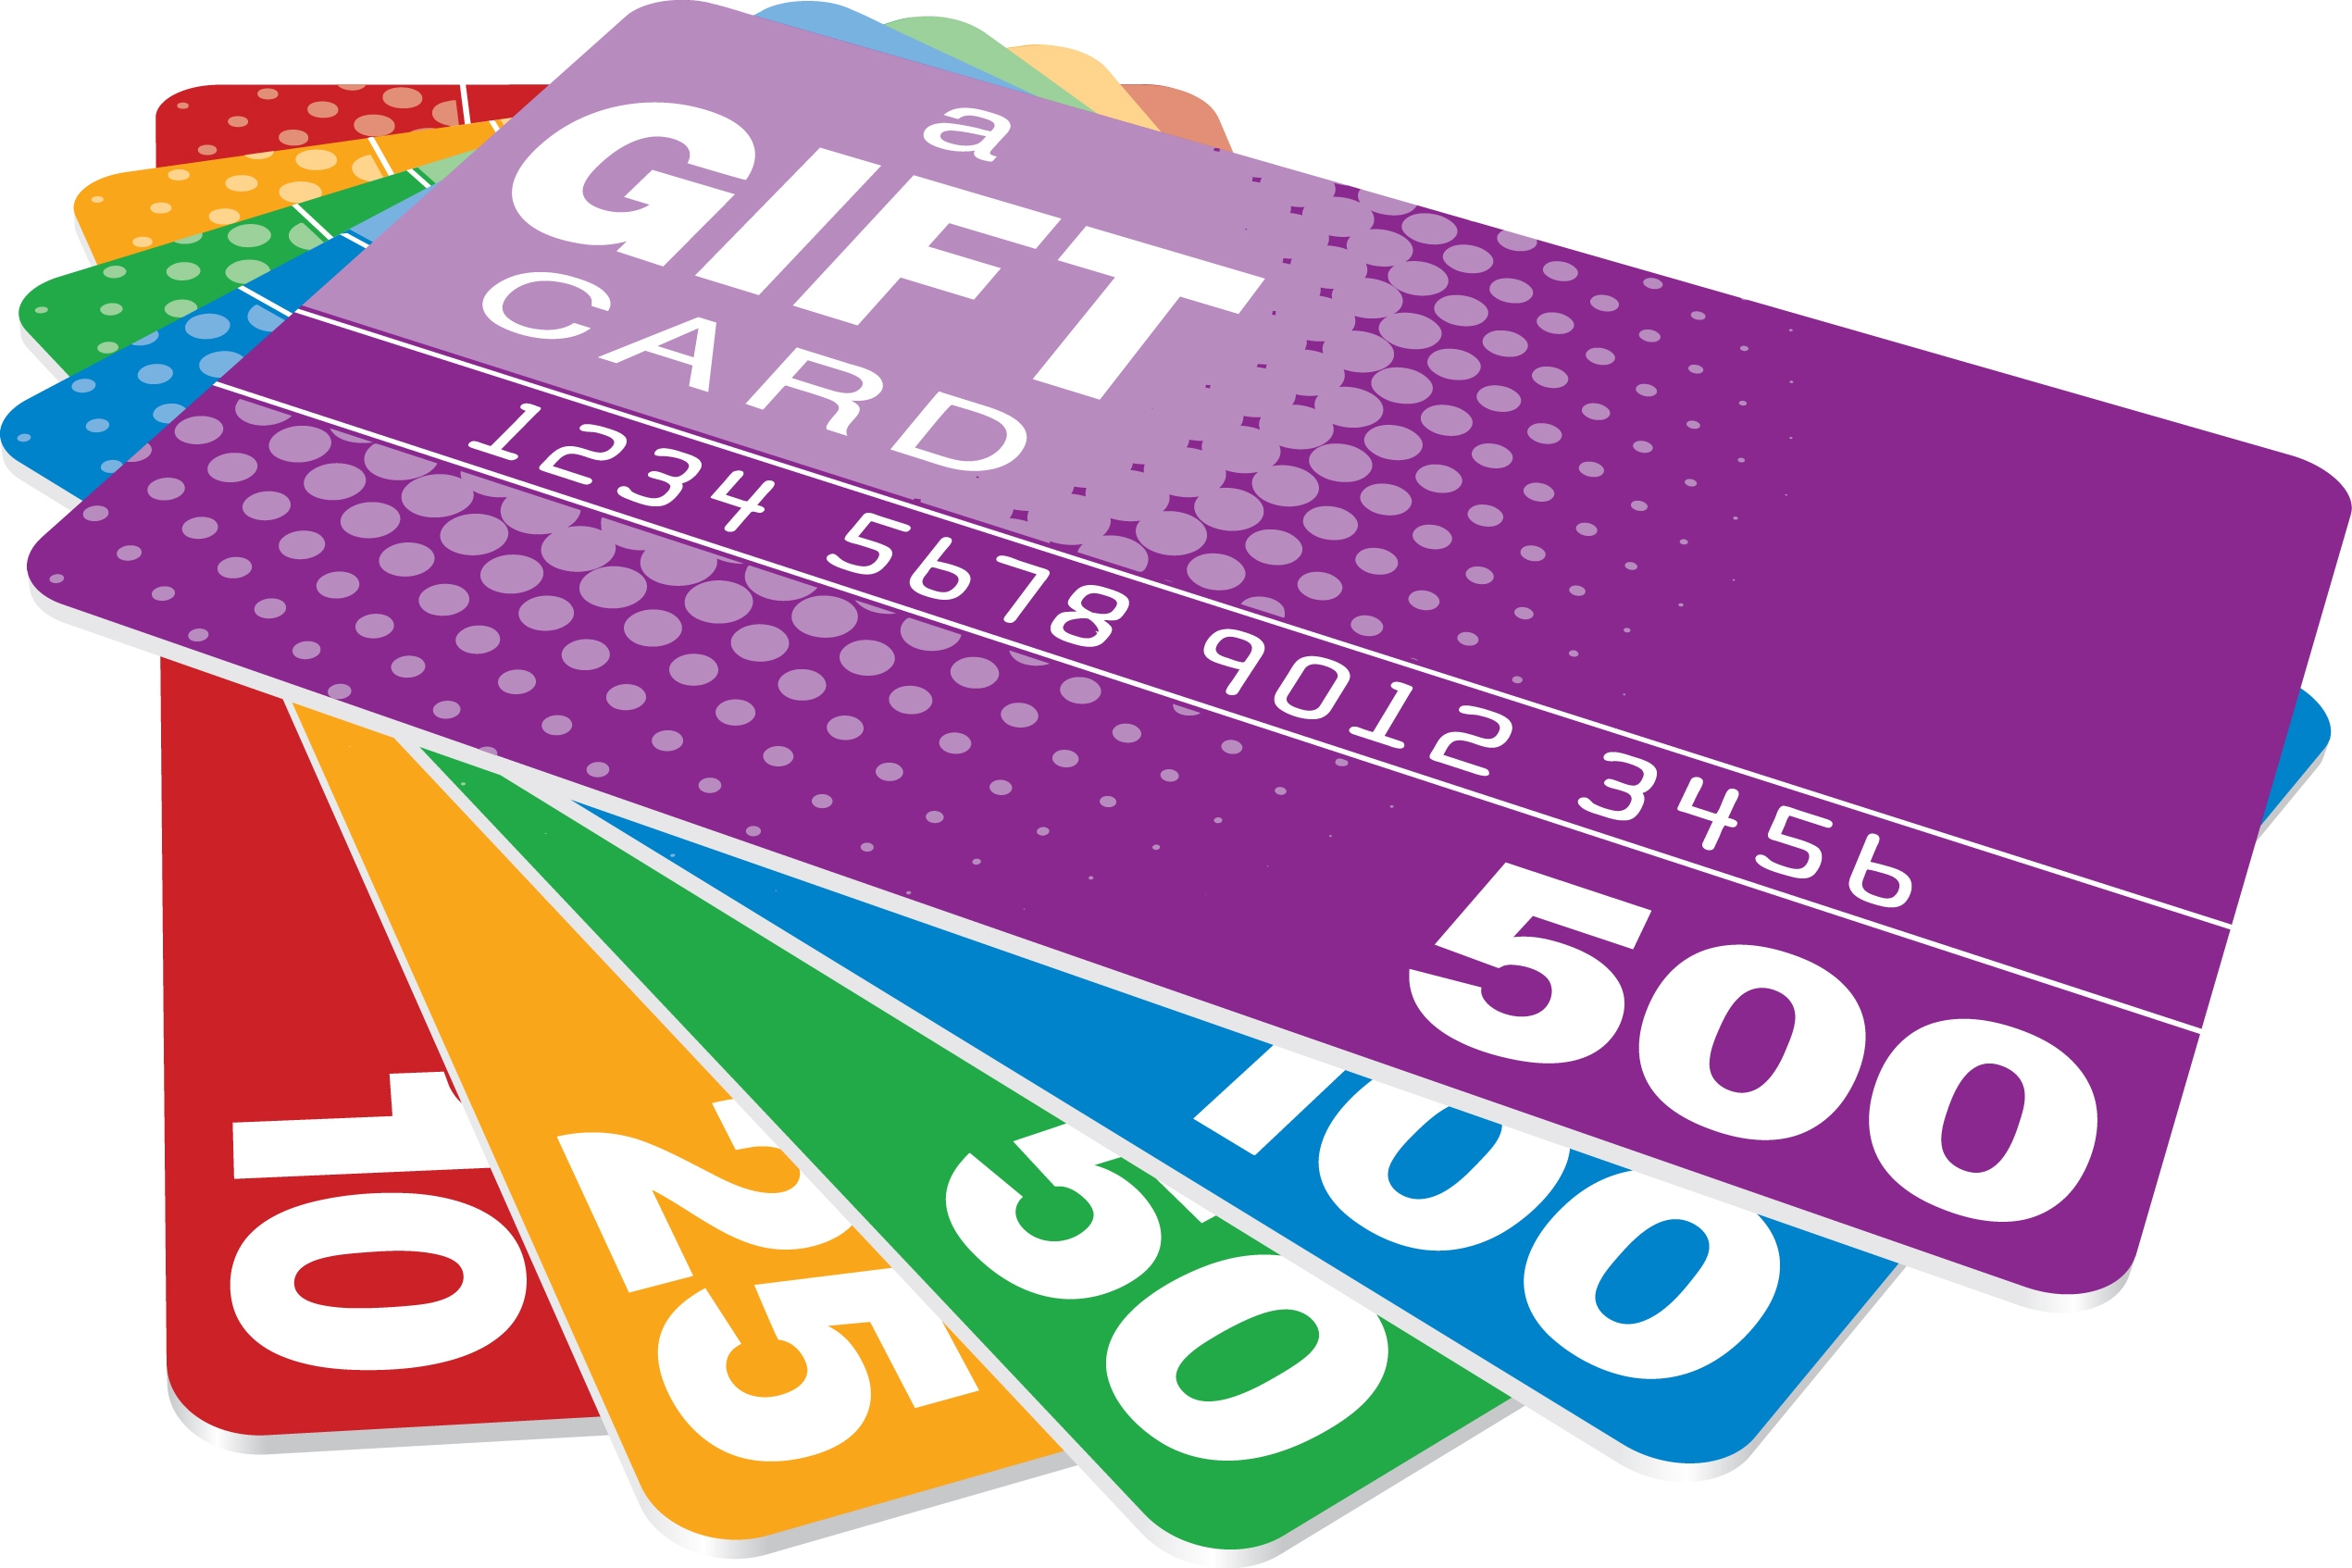 Four brightly colored cards with different denominations representing a gift card and loyalty program.